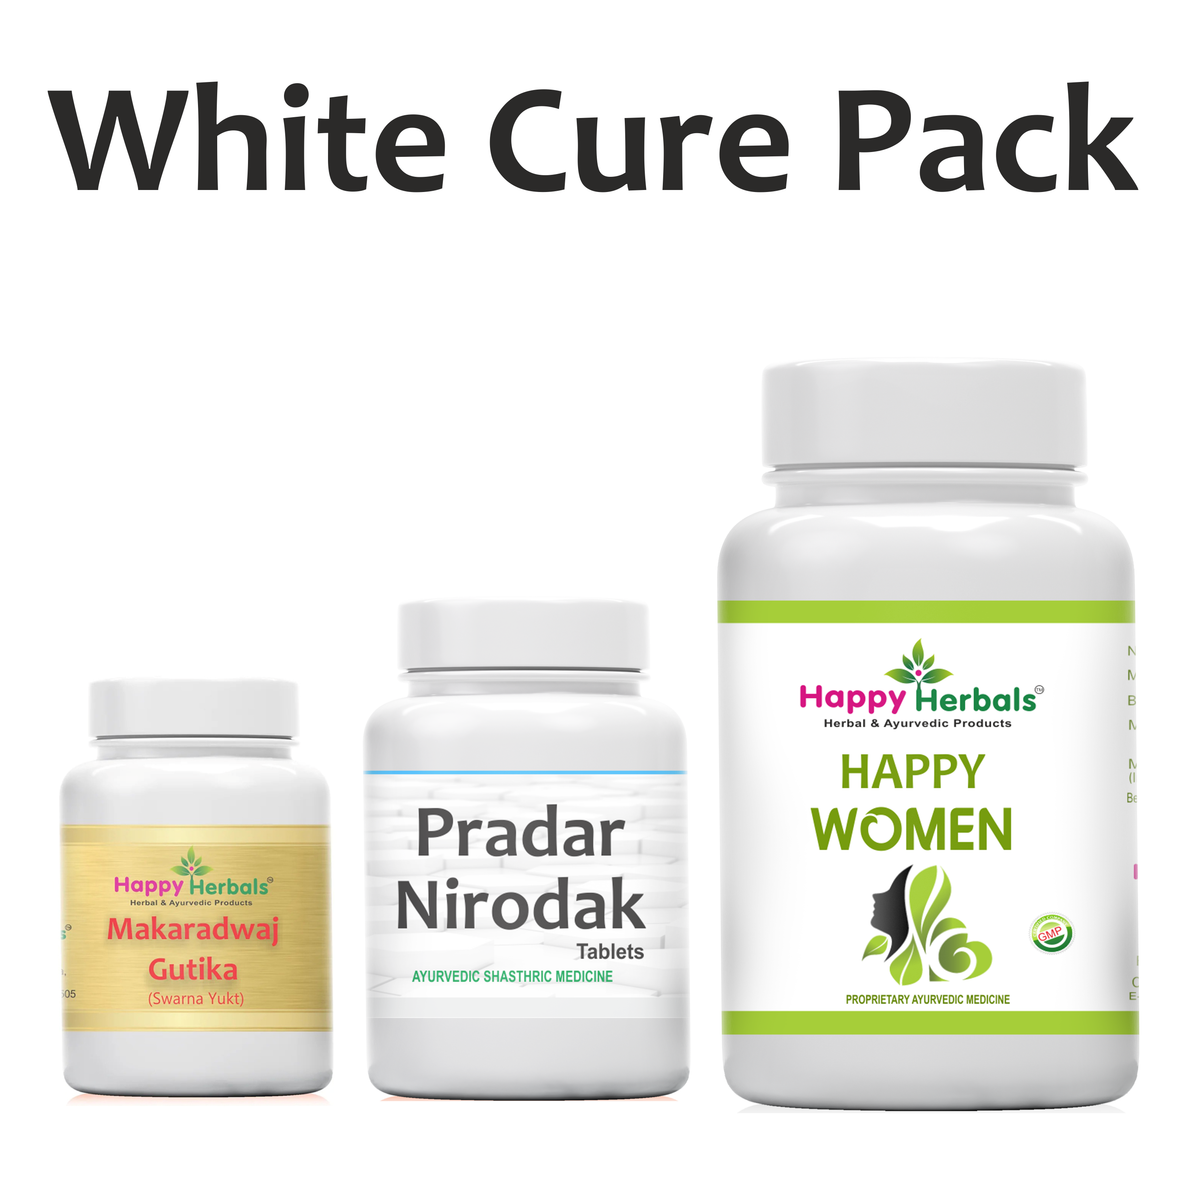 White Cure Pack